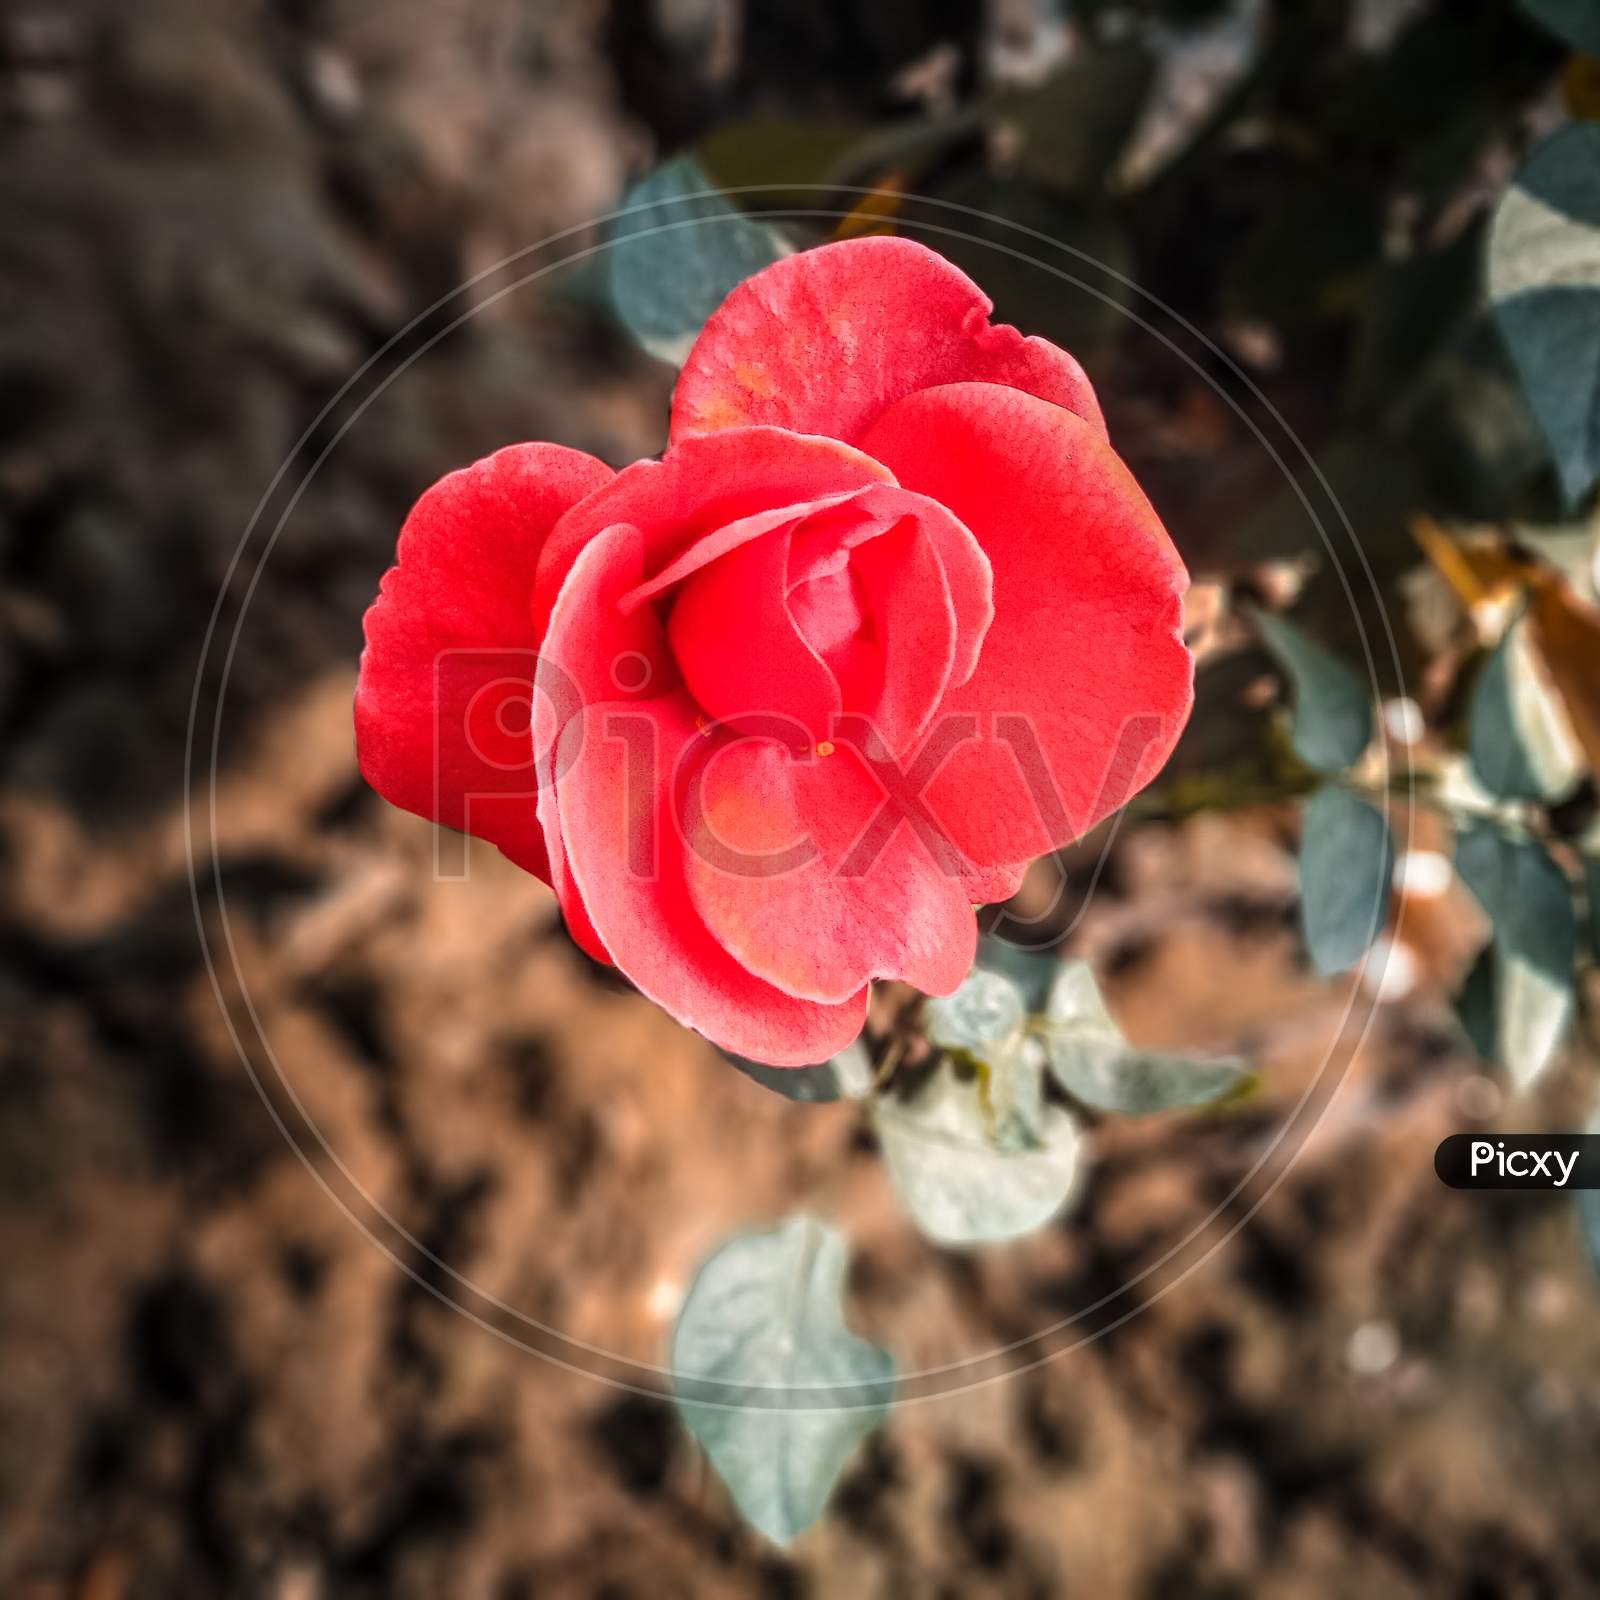 Red rose with potrait mode